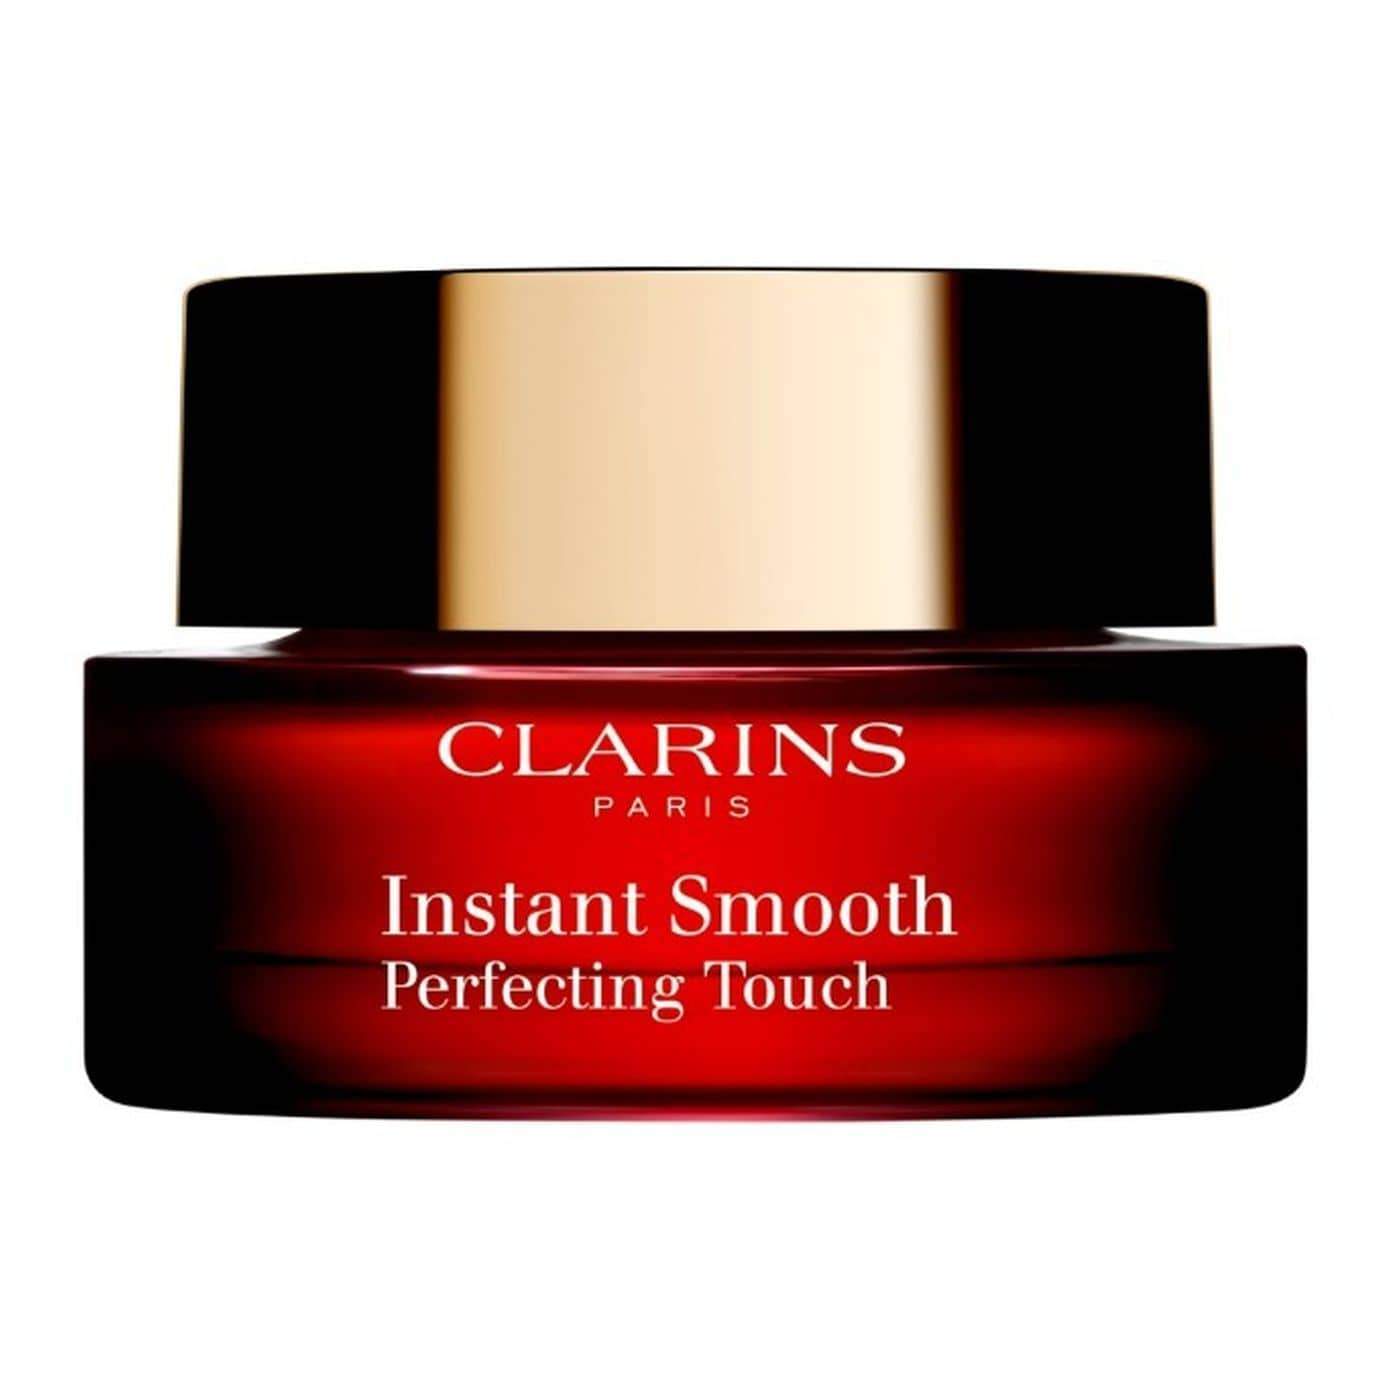 CLARINS Instant Smooth Perfecting Touch Minoustore